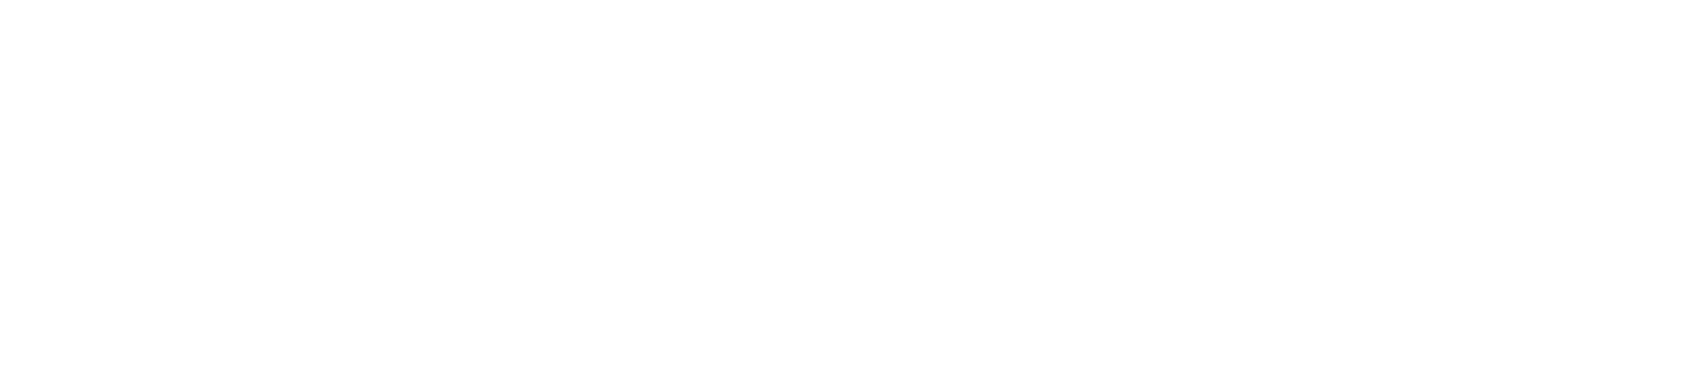 Anndo steel’s works